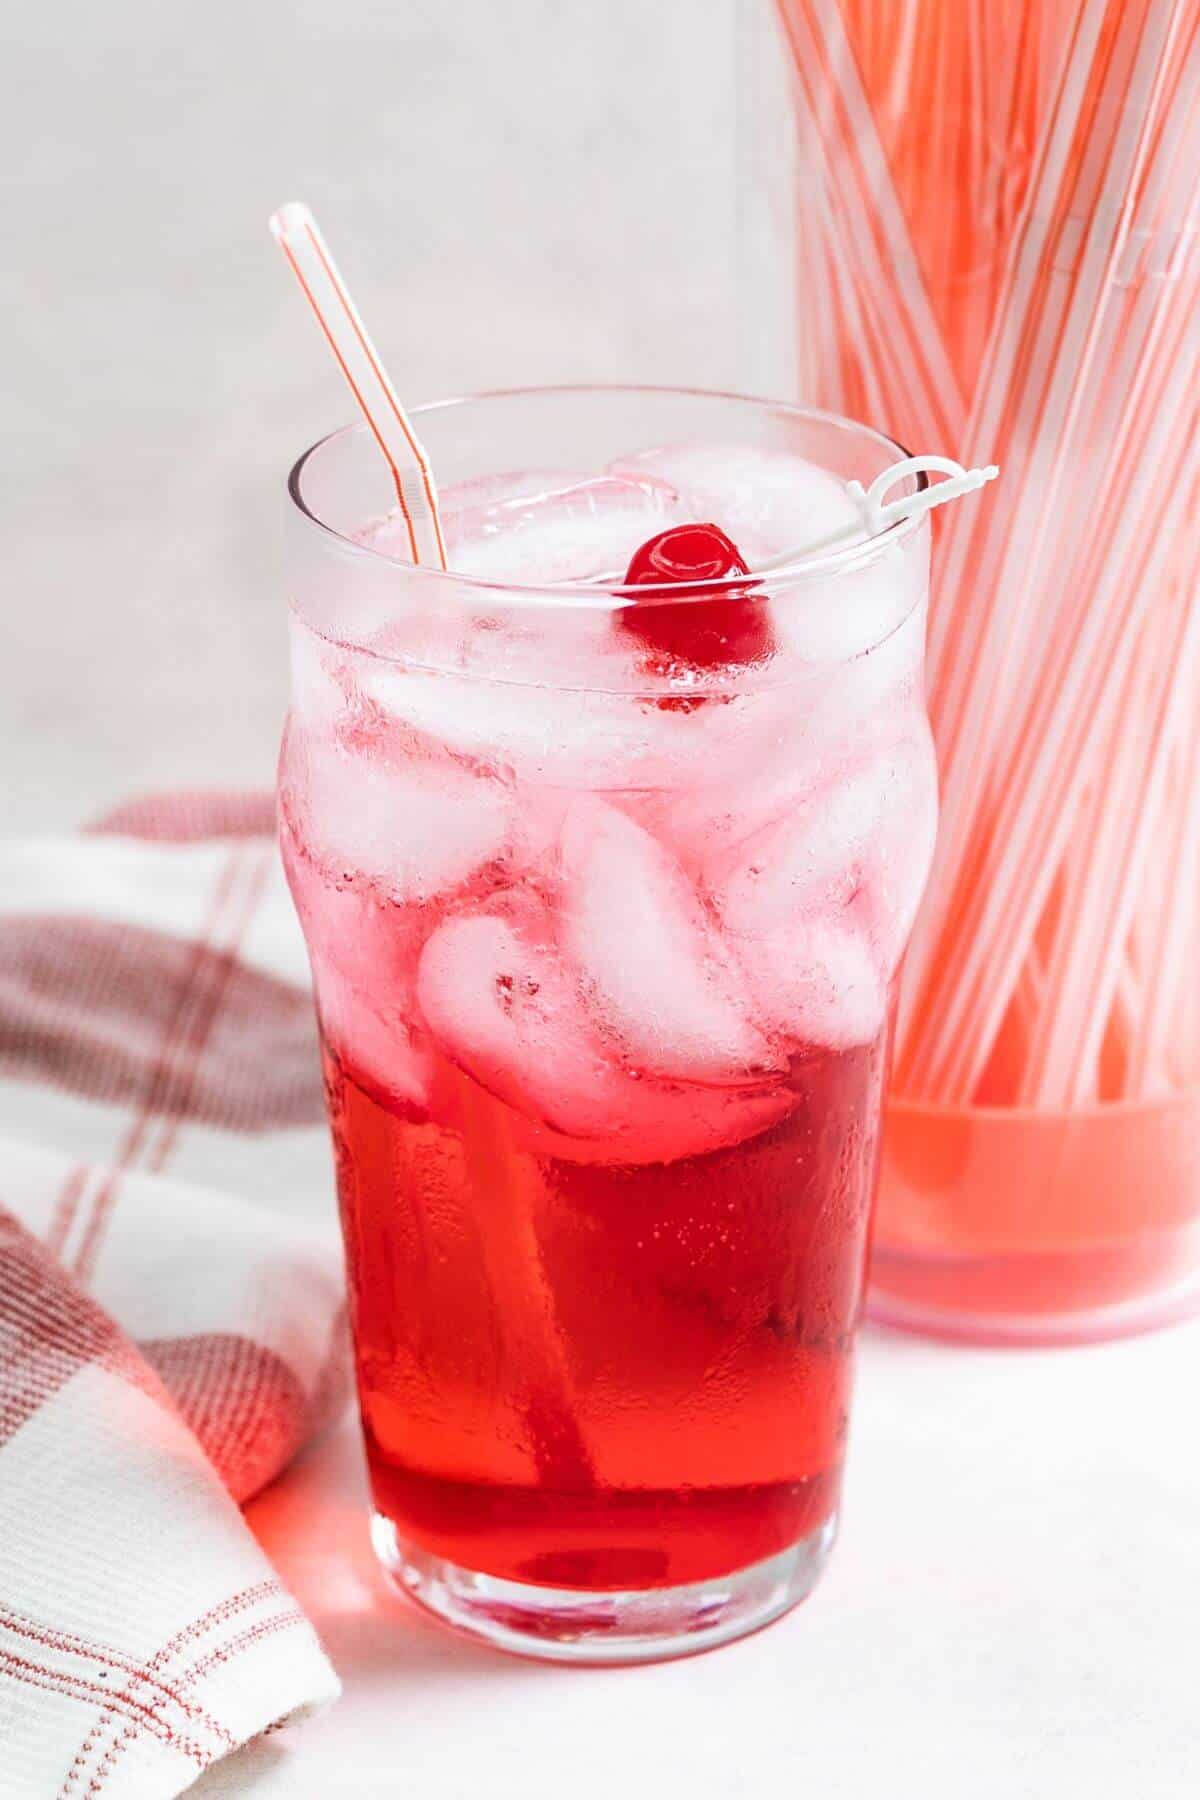 Shirley temple cocktail with straw.